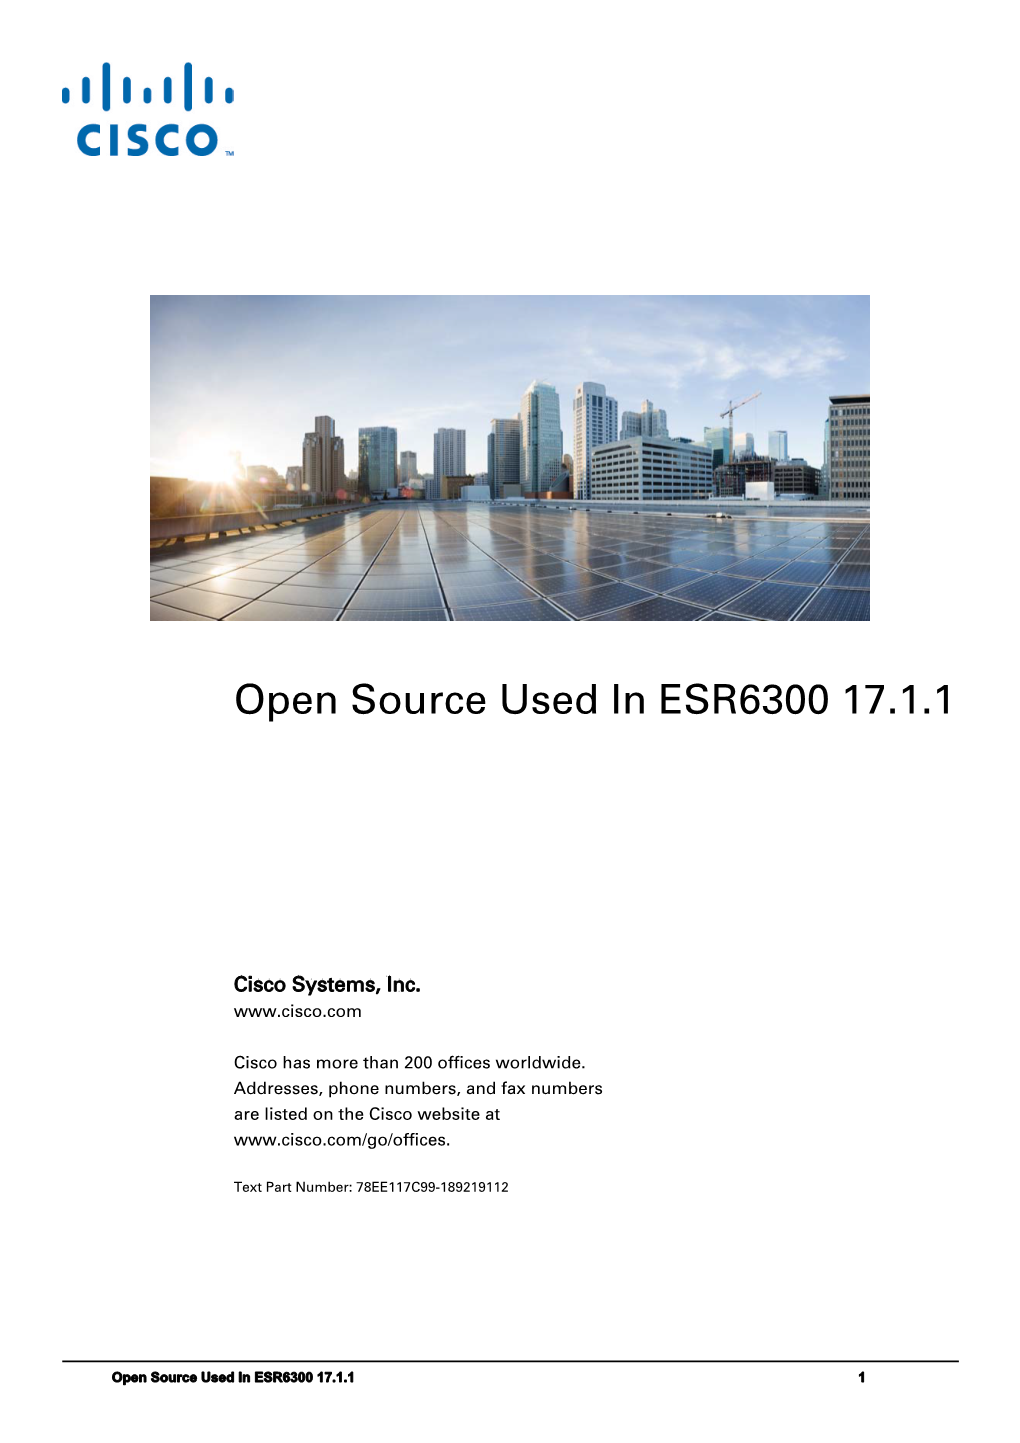 Open Source Used in ESR6300 for Release 17.1.1